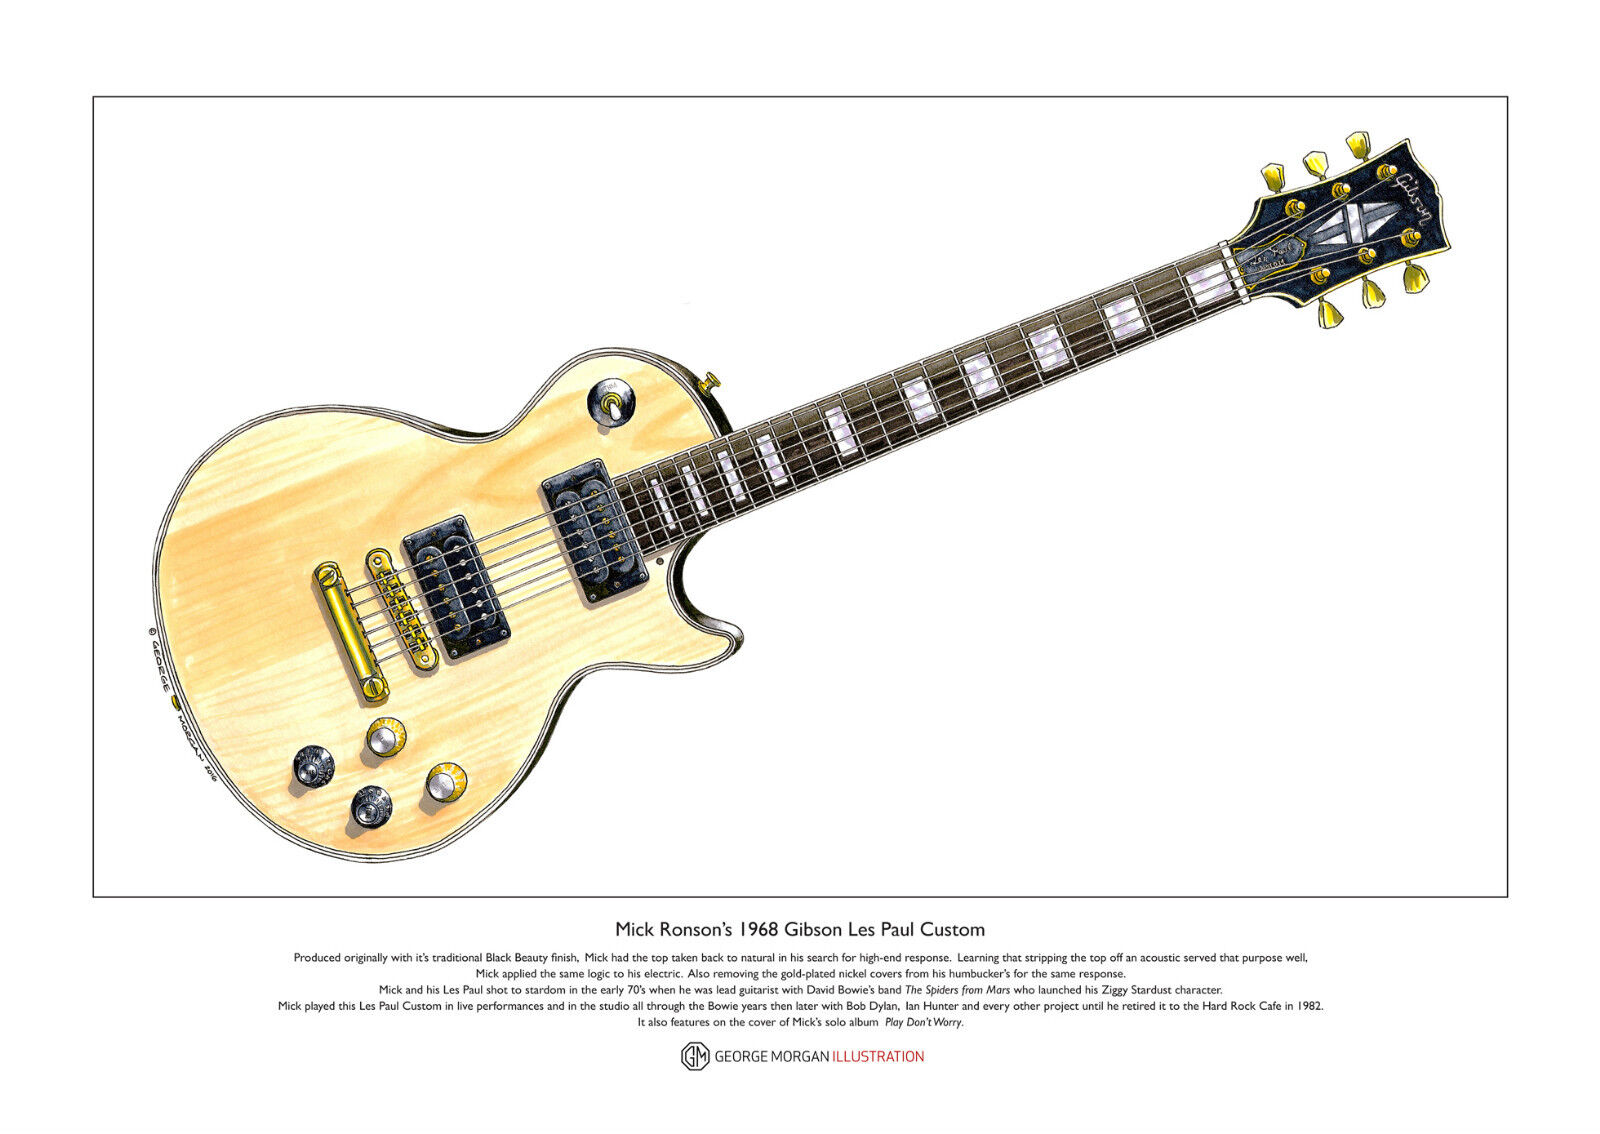 Mick Ronson’s Gibson Les Paul Custom Limited Edition Fine Art Print A3 size